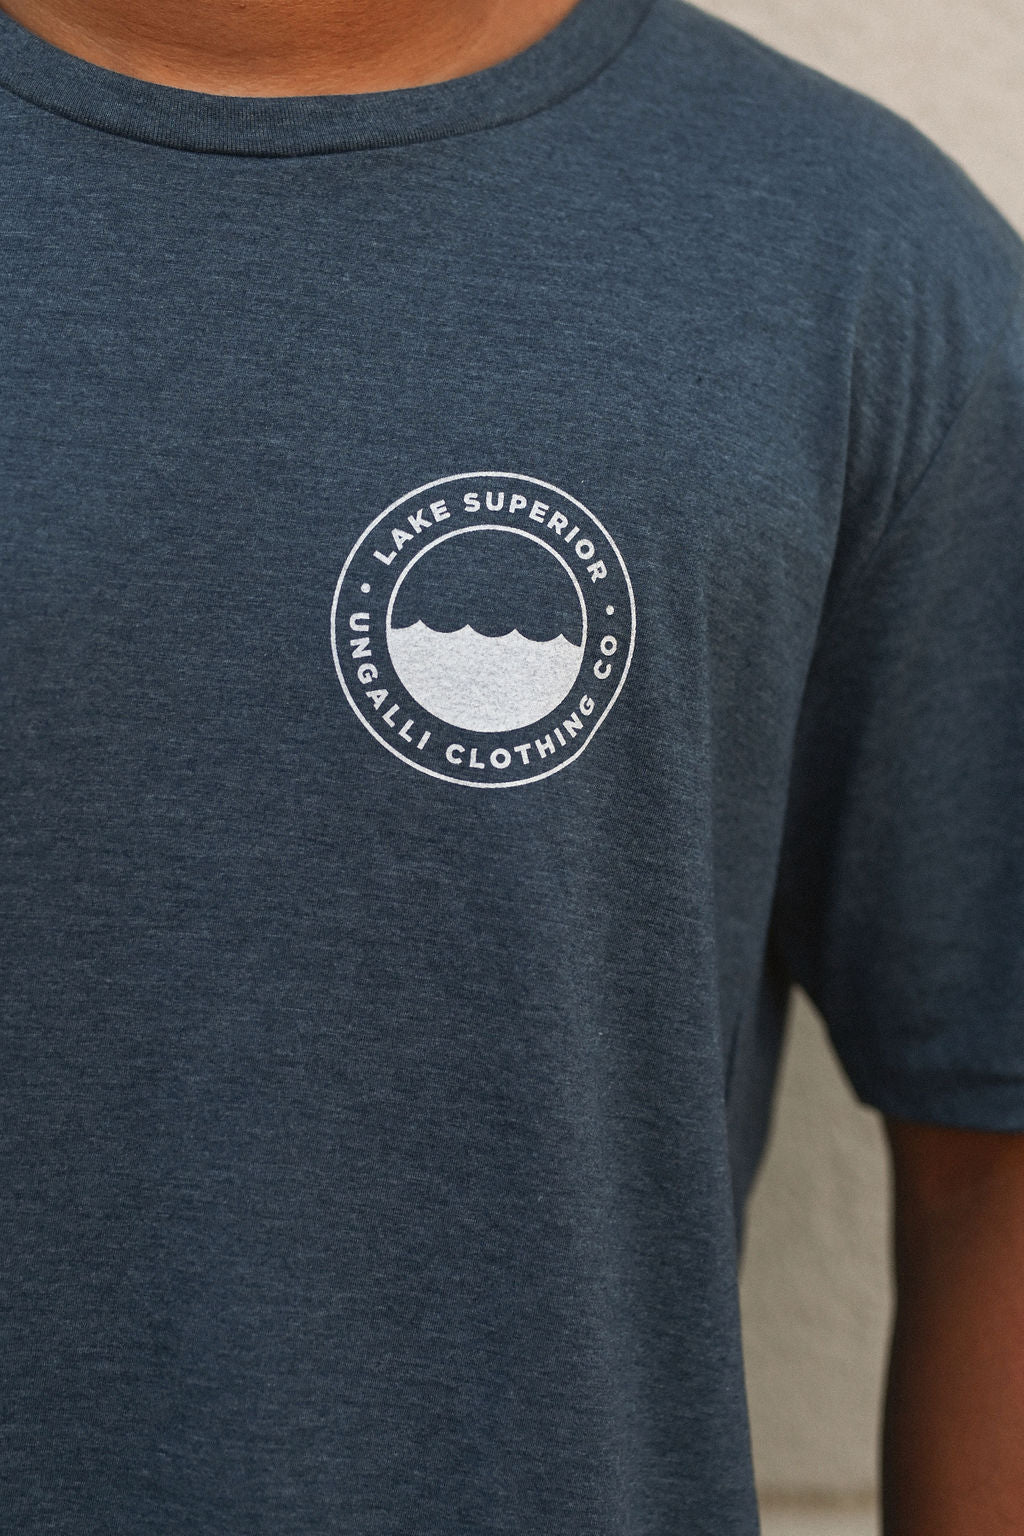 Organically made unisex short sleeve t-shirt in blue with white Lake Superior logo on front